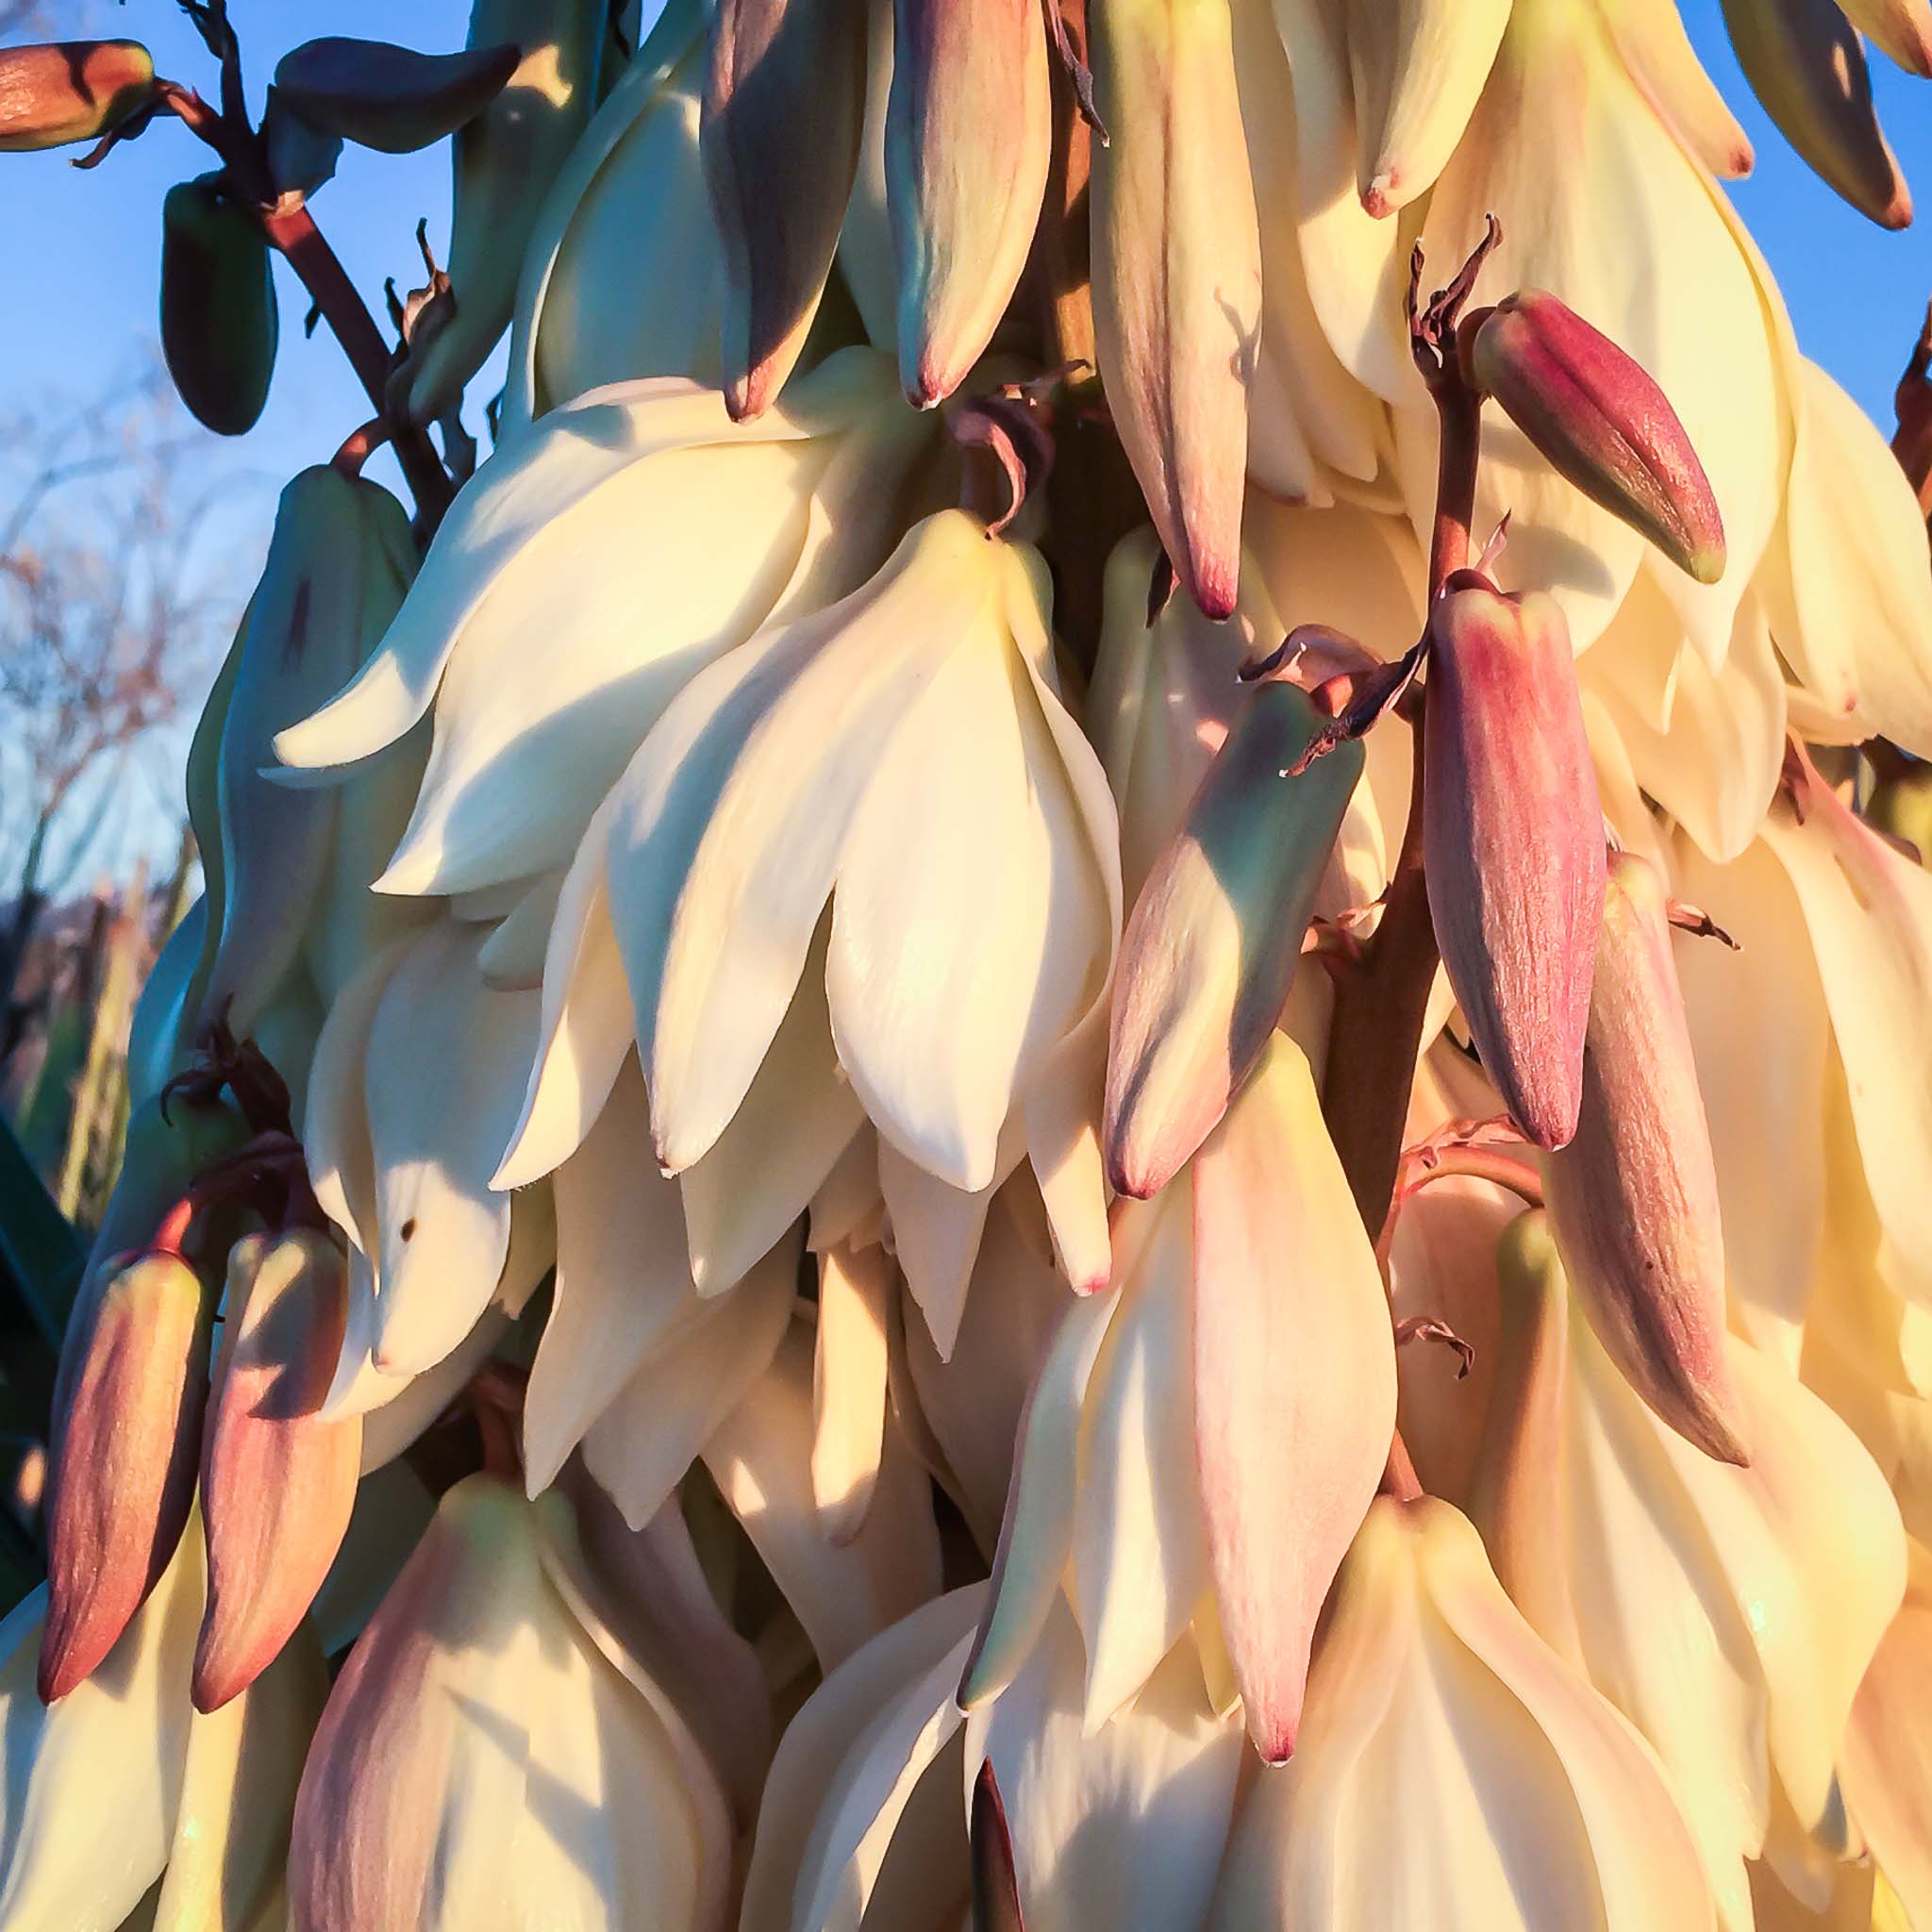 Yucca blossom, Columbus NM, March 27, 2015